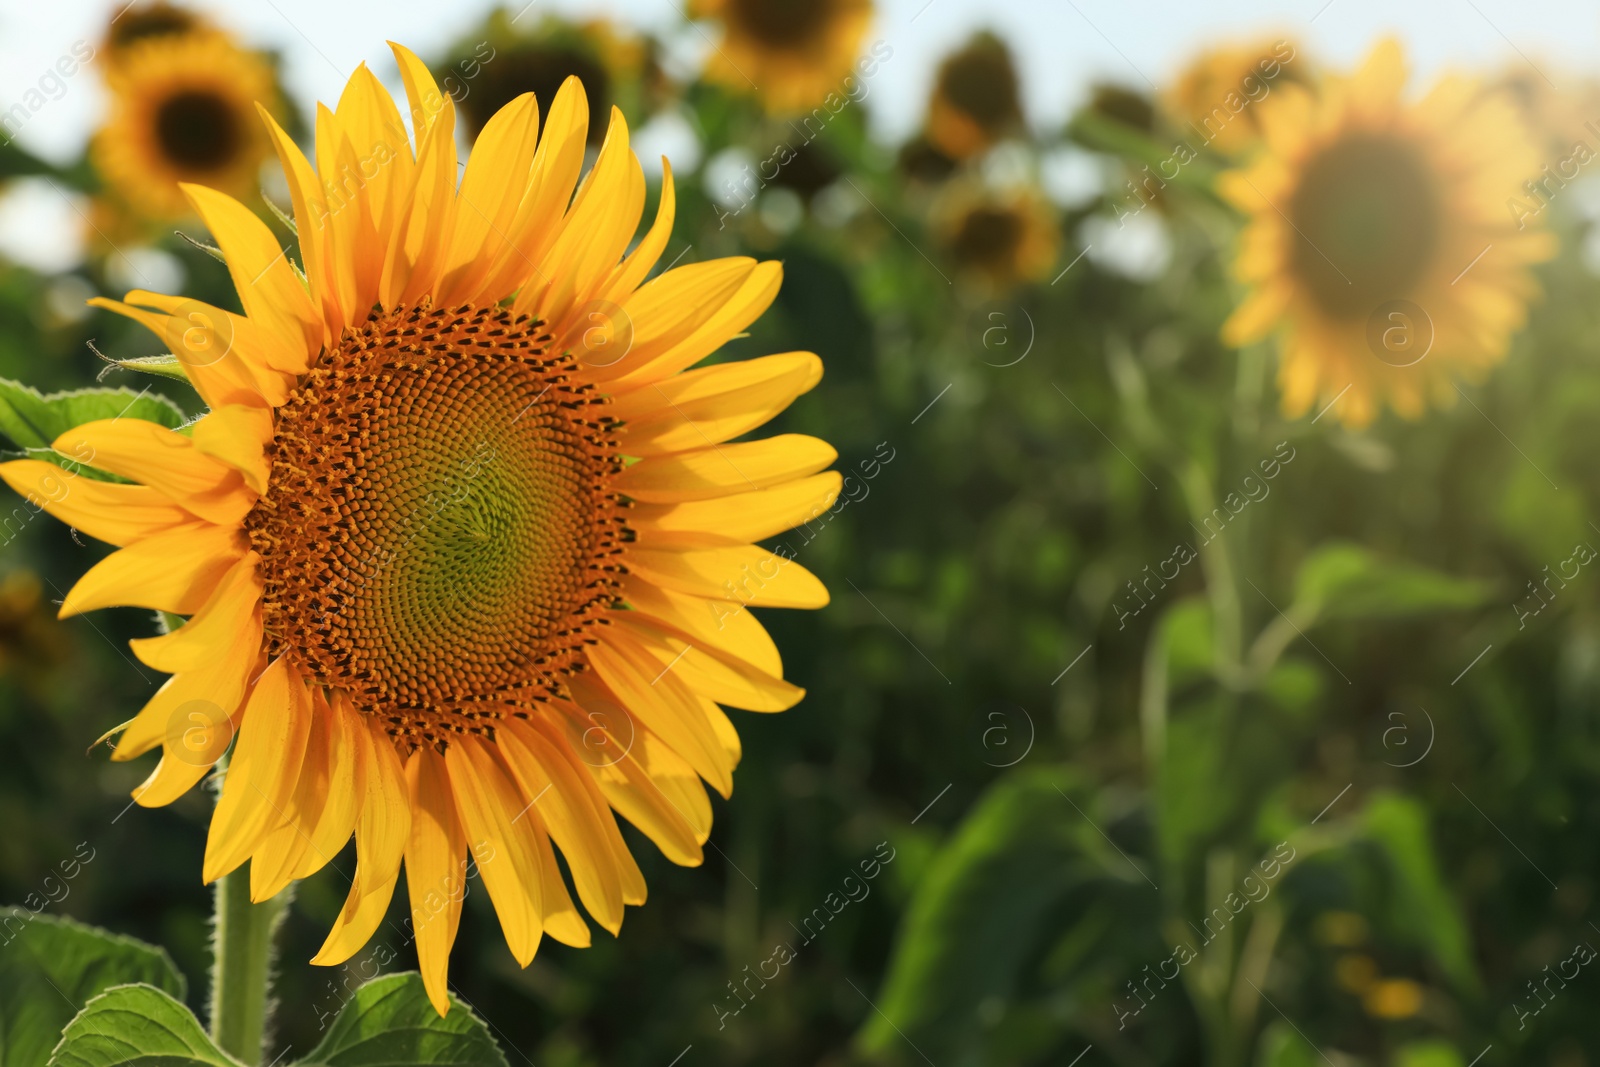 Photo of Sunflower growing in field outdoors, space for text